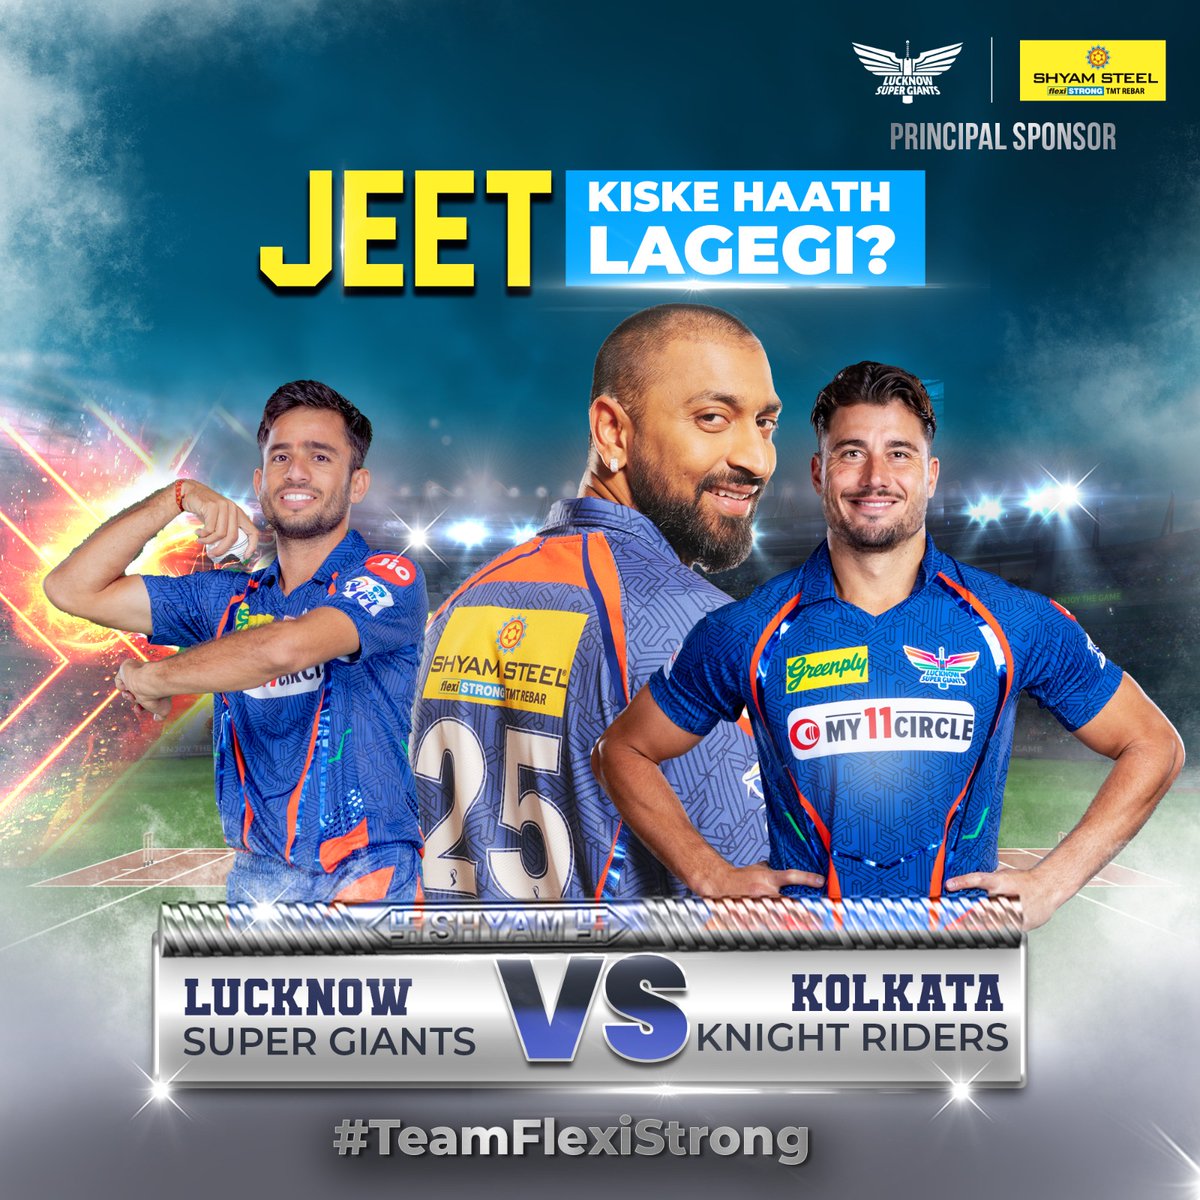 We are set on a mission to create an epic and glorious history.

Watch #KolkataKnightRiders vs @LucknowIPL  today!

#ShyamSteel #ShyamSteelIndia #TeamFlexiStrong #Strength #Flexibility #HameshaKeLiyeStrong #LSG #Cricket #IPL #IndianCricket #CricketFans #Lucknow